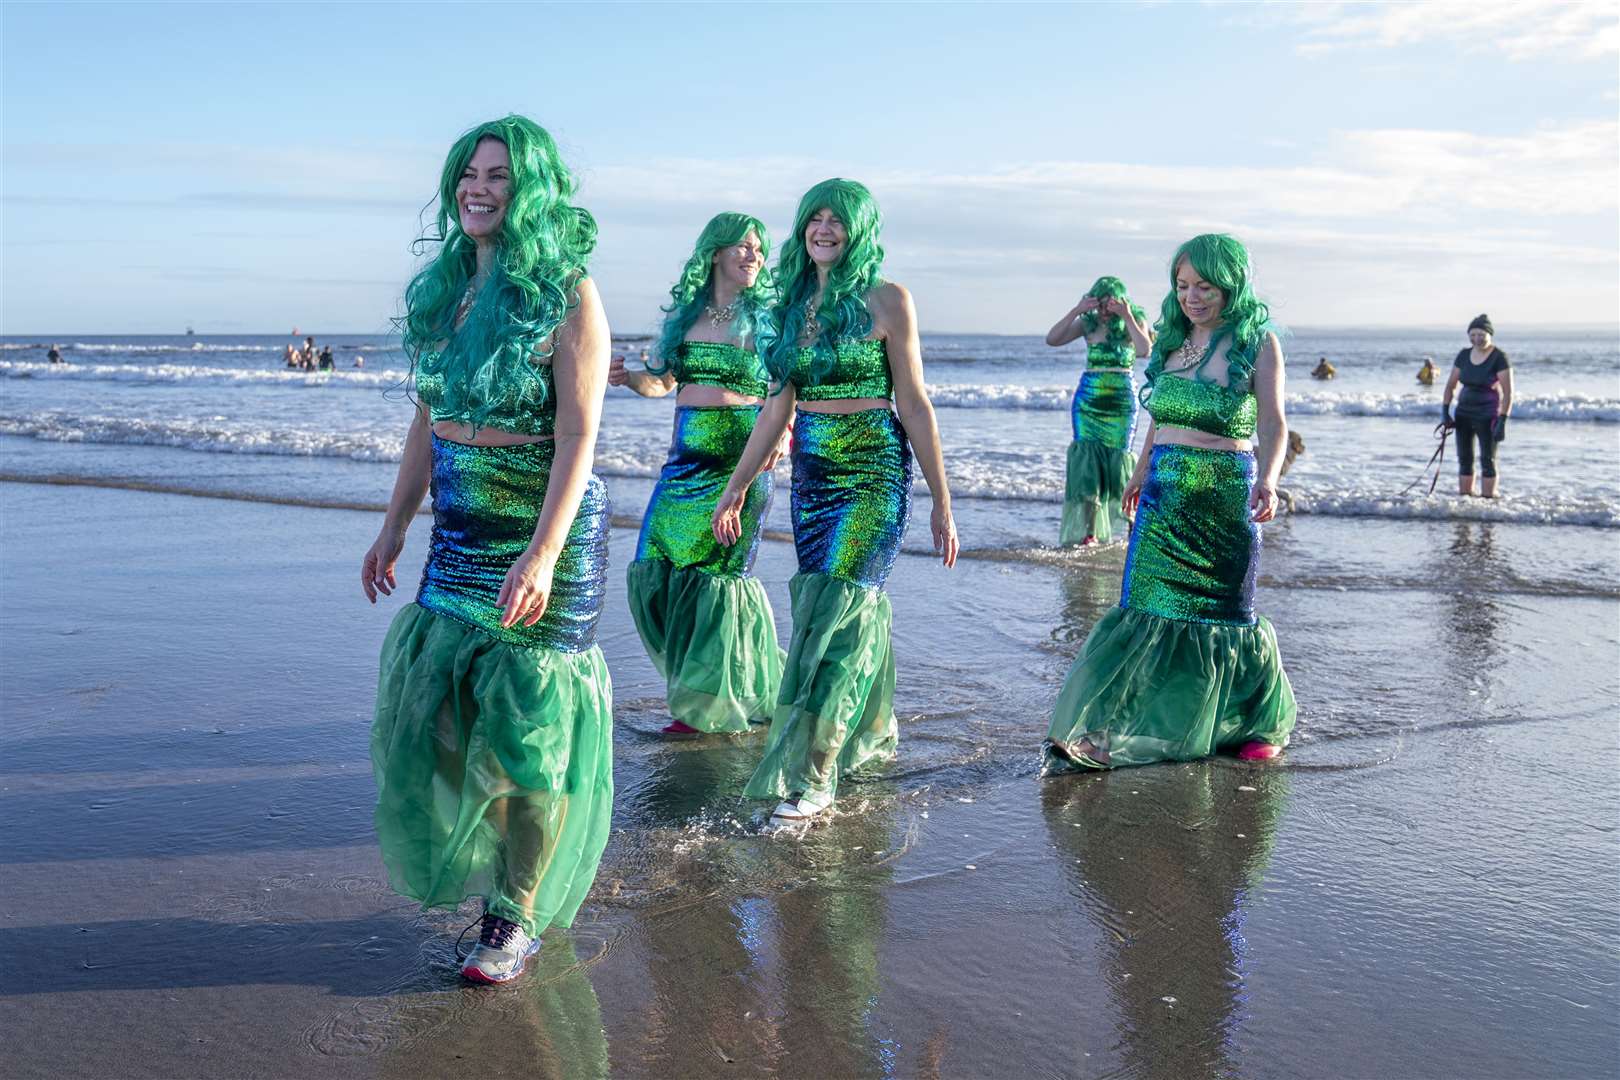 People take part in a Loony Dook New Year’s Day dip in the Firth of Forth at Kinghorn in Fife (Jane Barlow/PA)